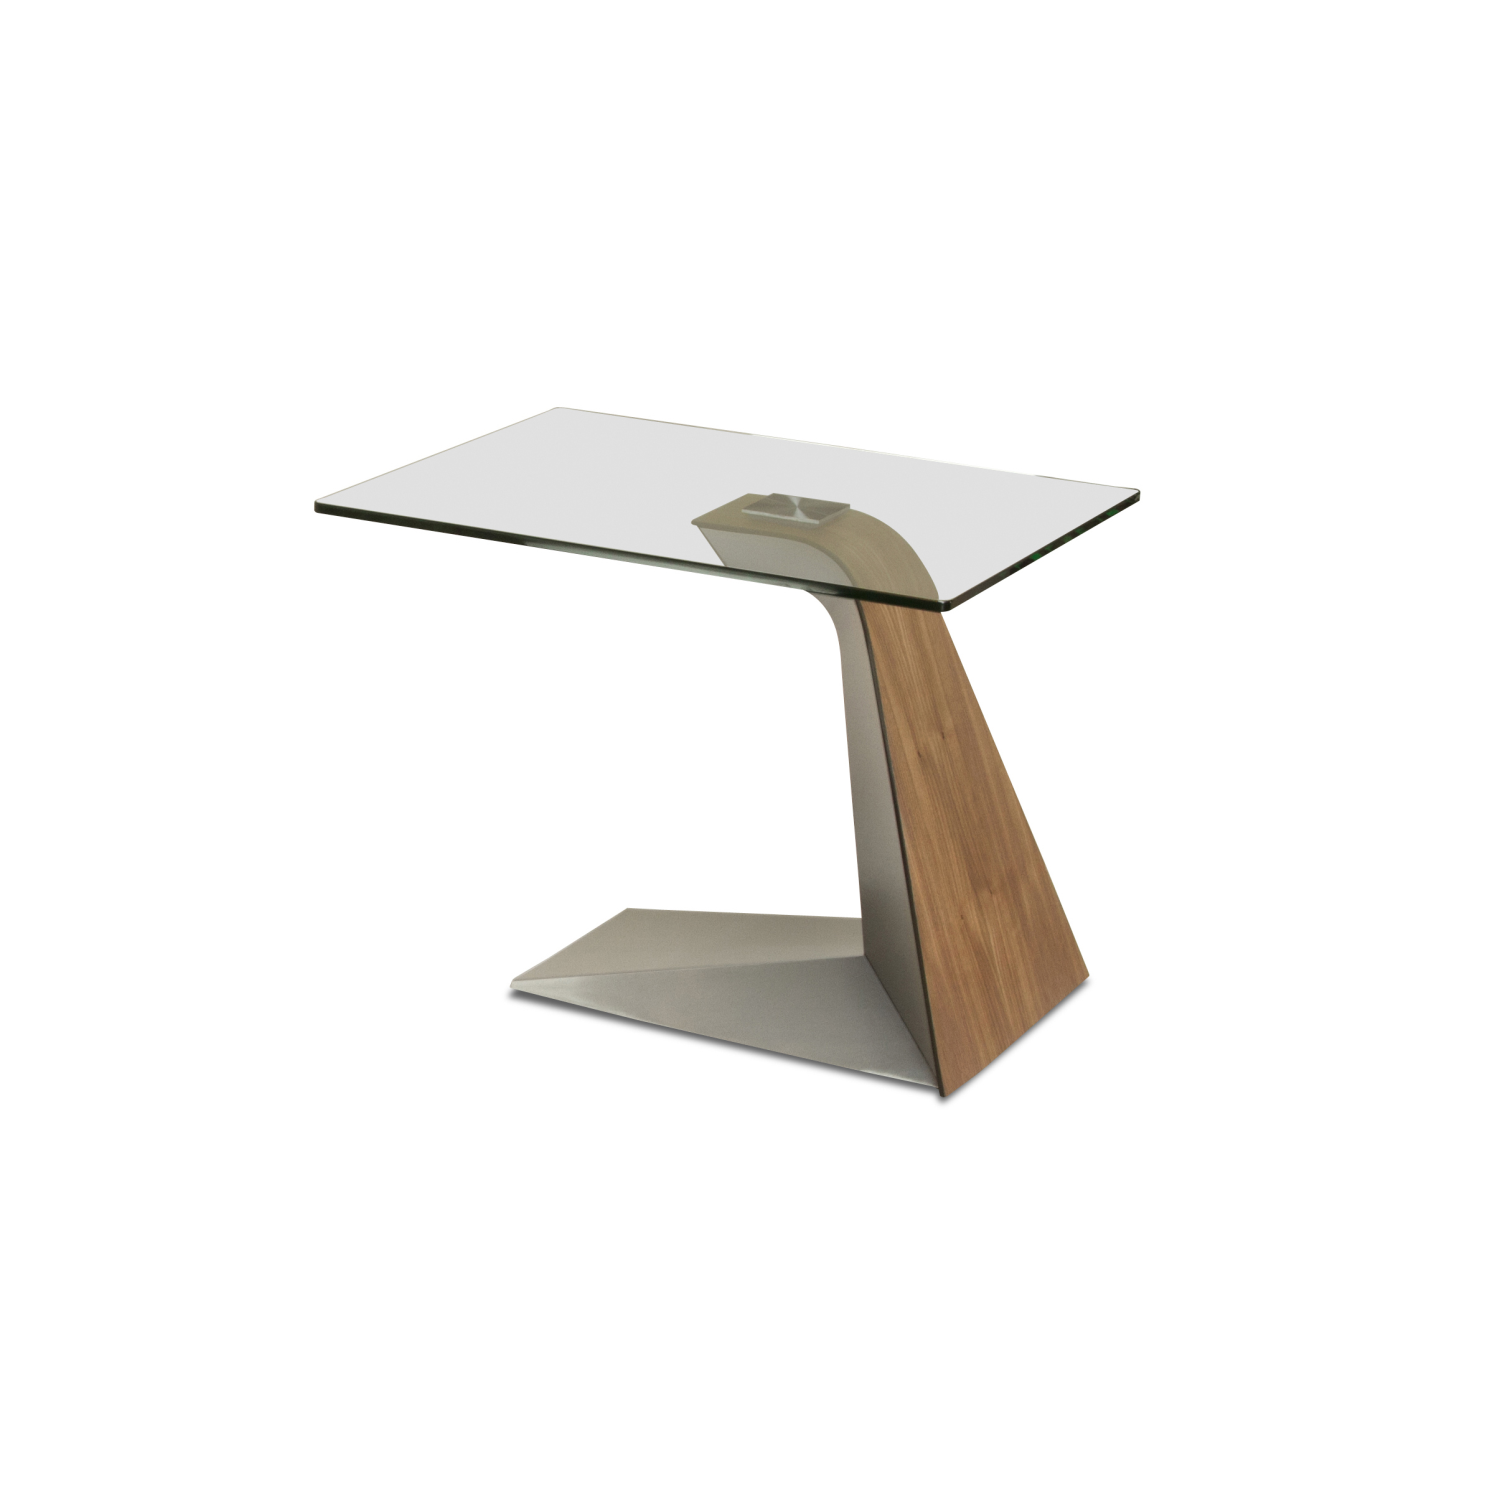 Hyper End Table Image with White Background